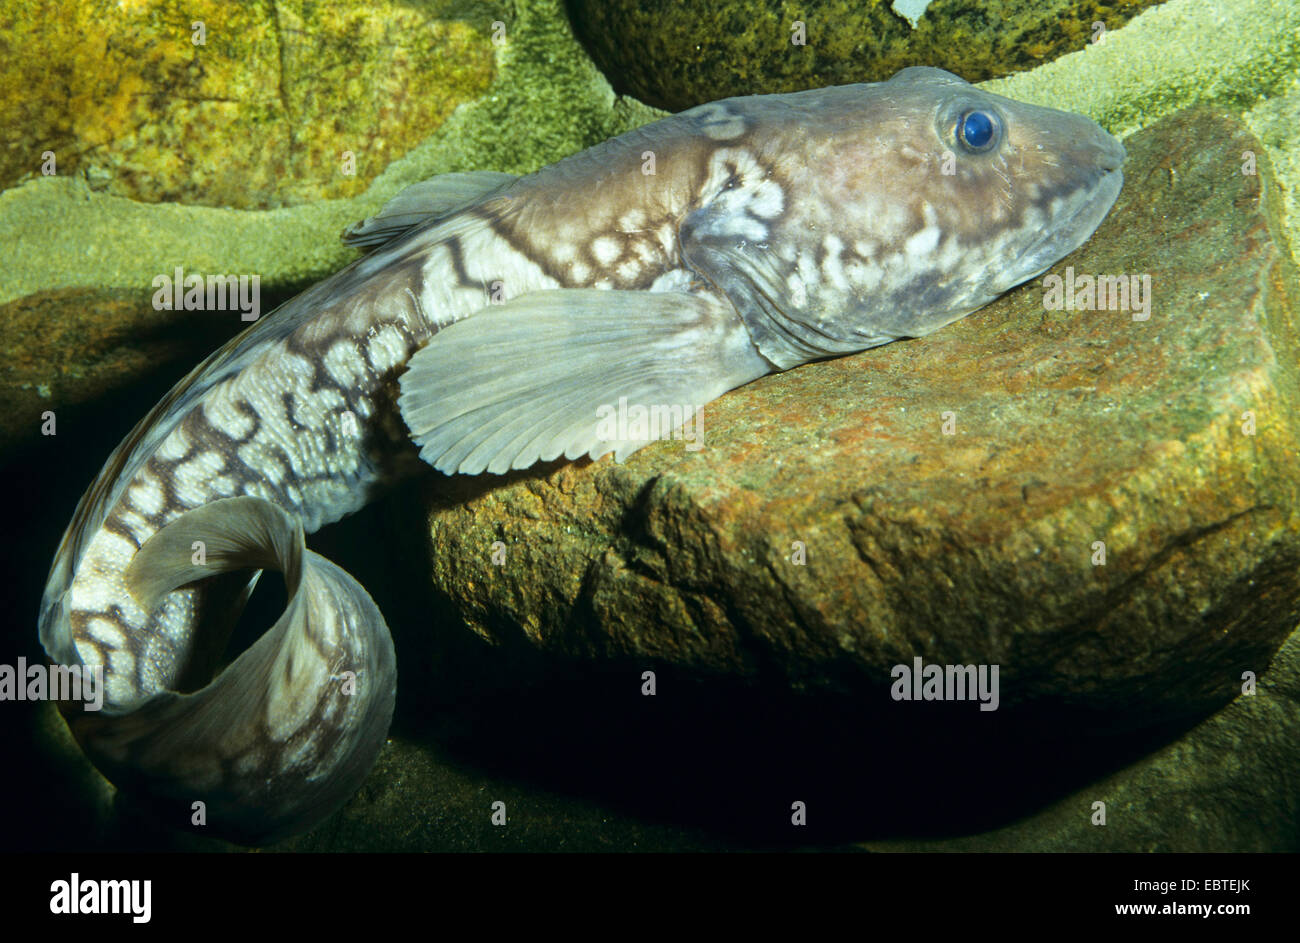 Arctic eelpout (Lycodes reticulatus), lying on rocky ground Stock Photo